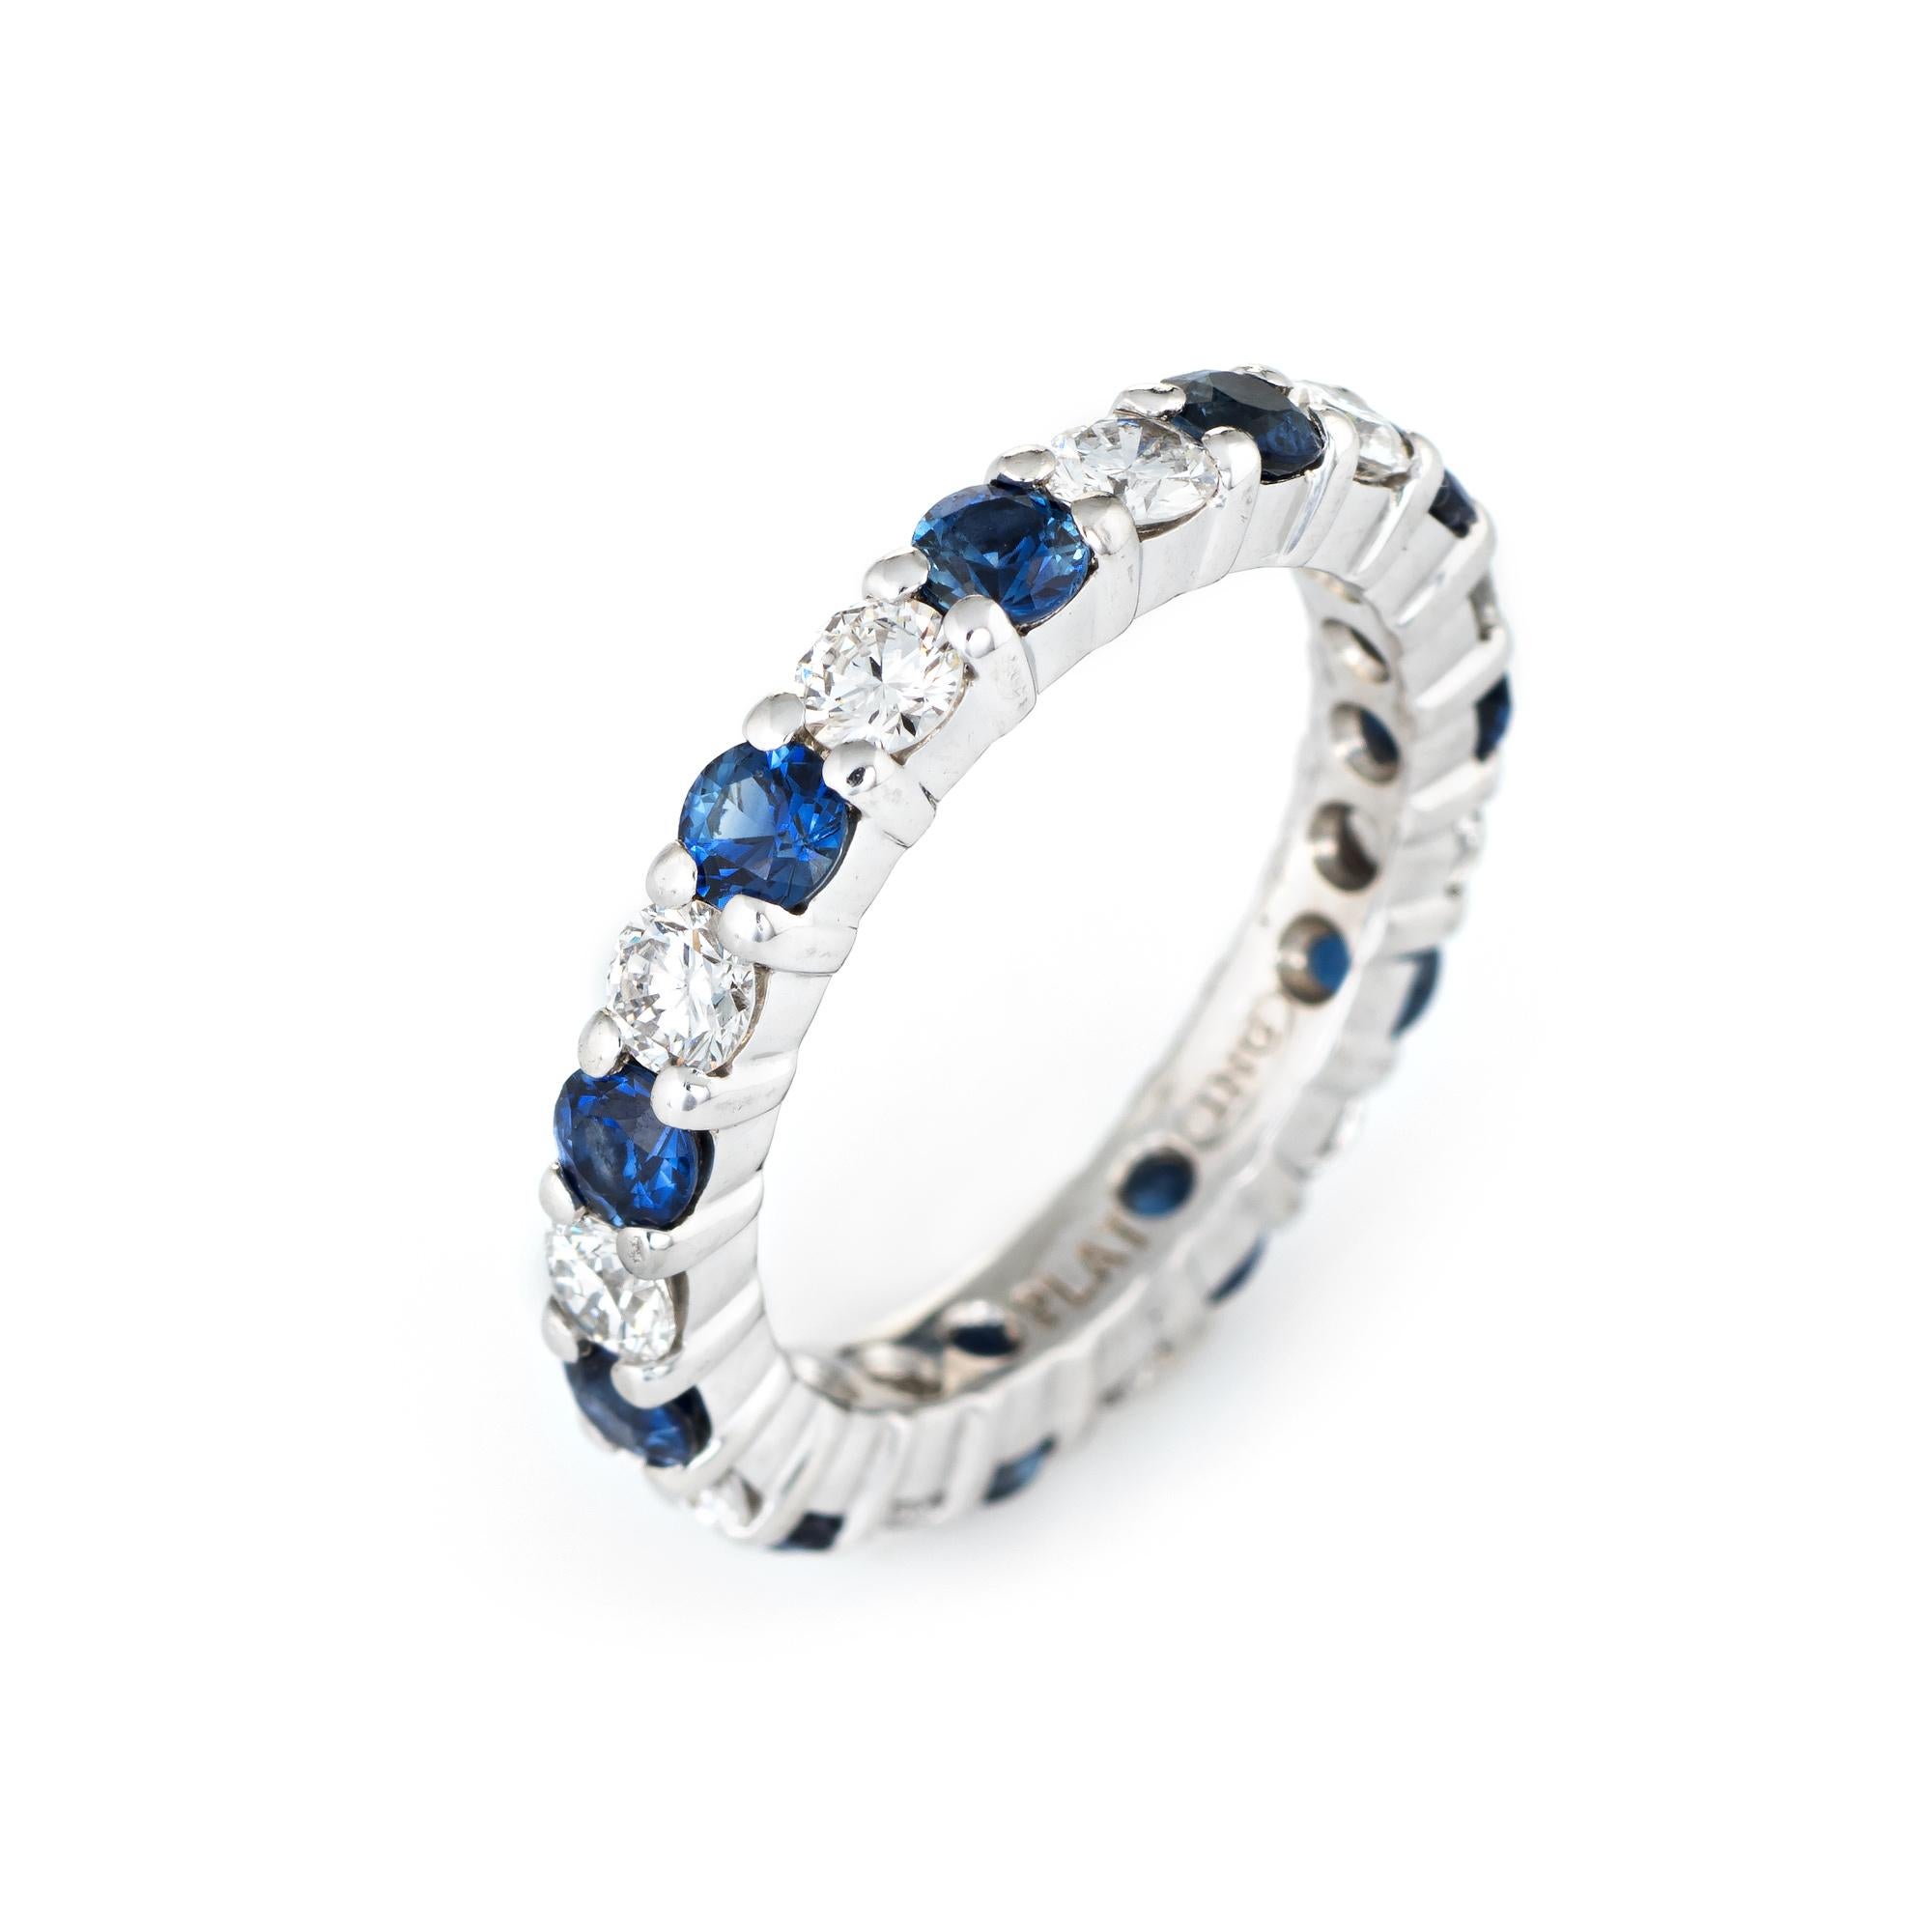 Stylish estate diamond & sapphire eternity ring crafted in 900 platinum. 

11 round brilliant cut diamonds are estimated at 0.10 carats each totaling an estimated 1.10 carats (estimated at H-I color and VS2-SI1 clarity). 11 blue sapphires are